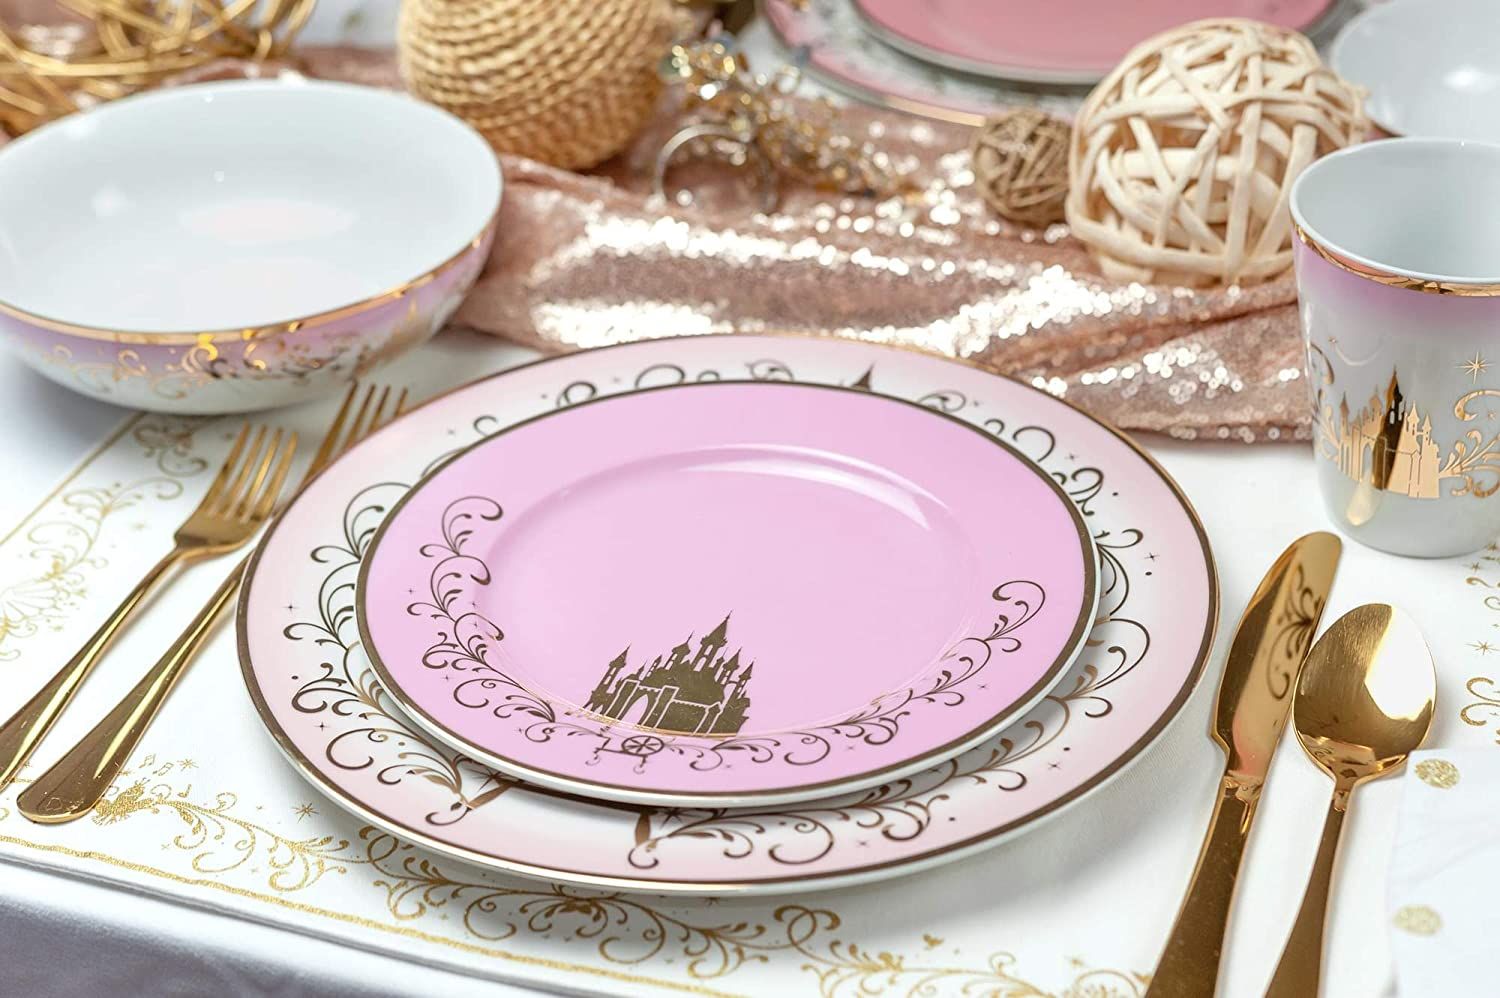 Disney Dinnerware is one of the best Disney collectibles